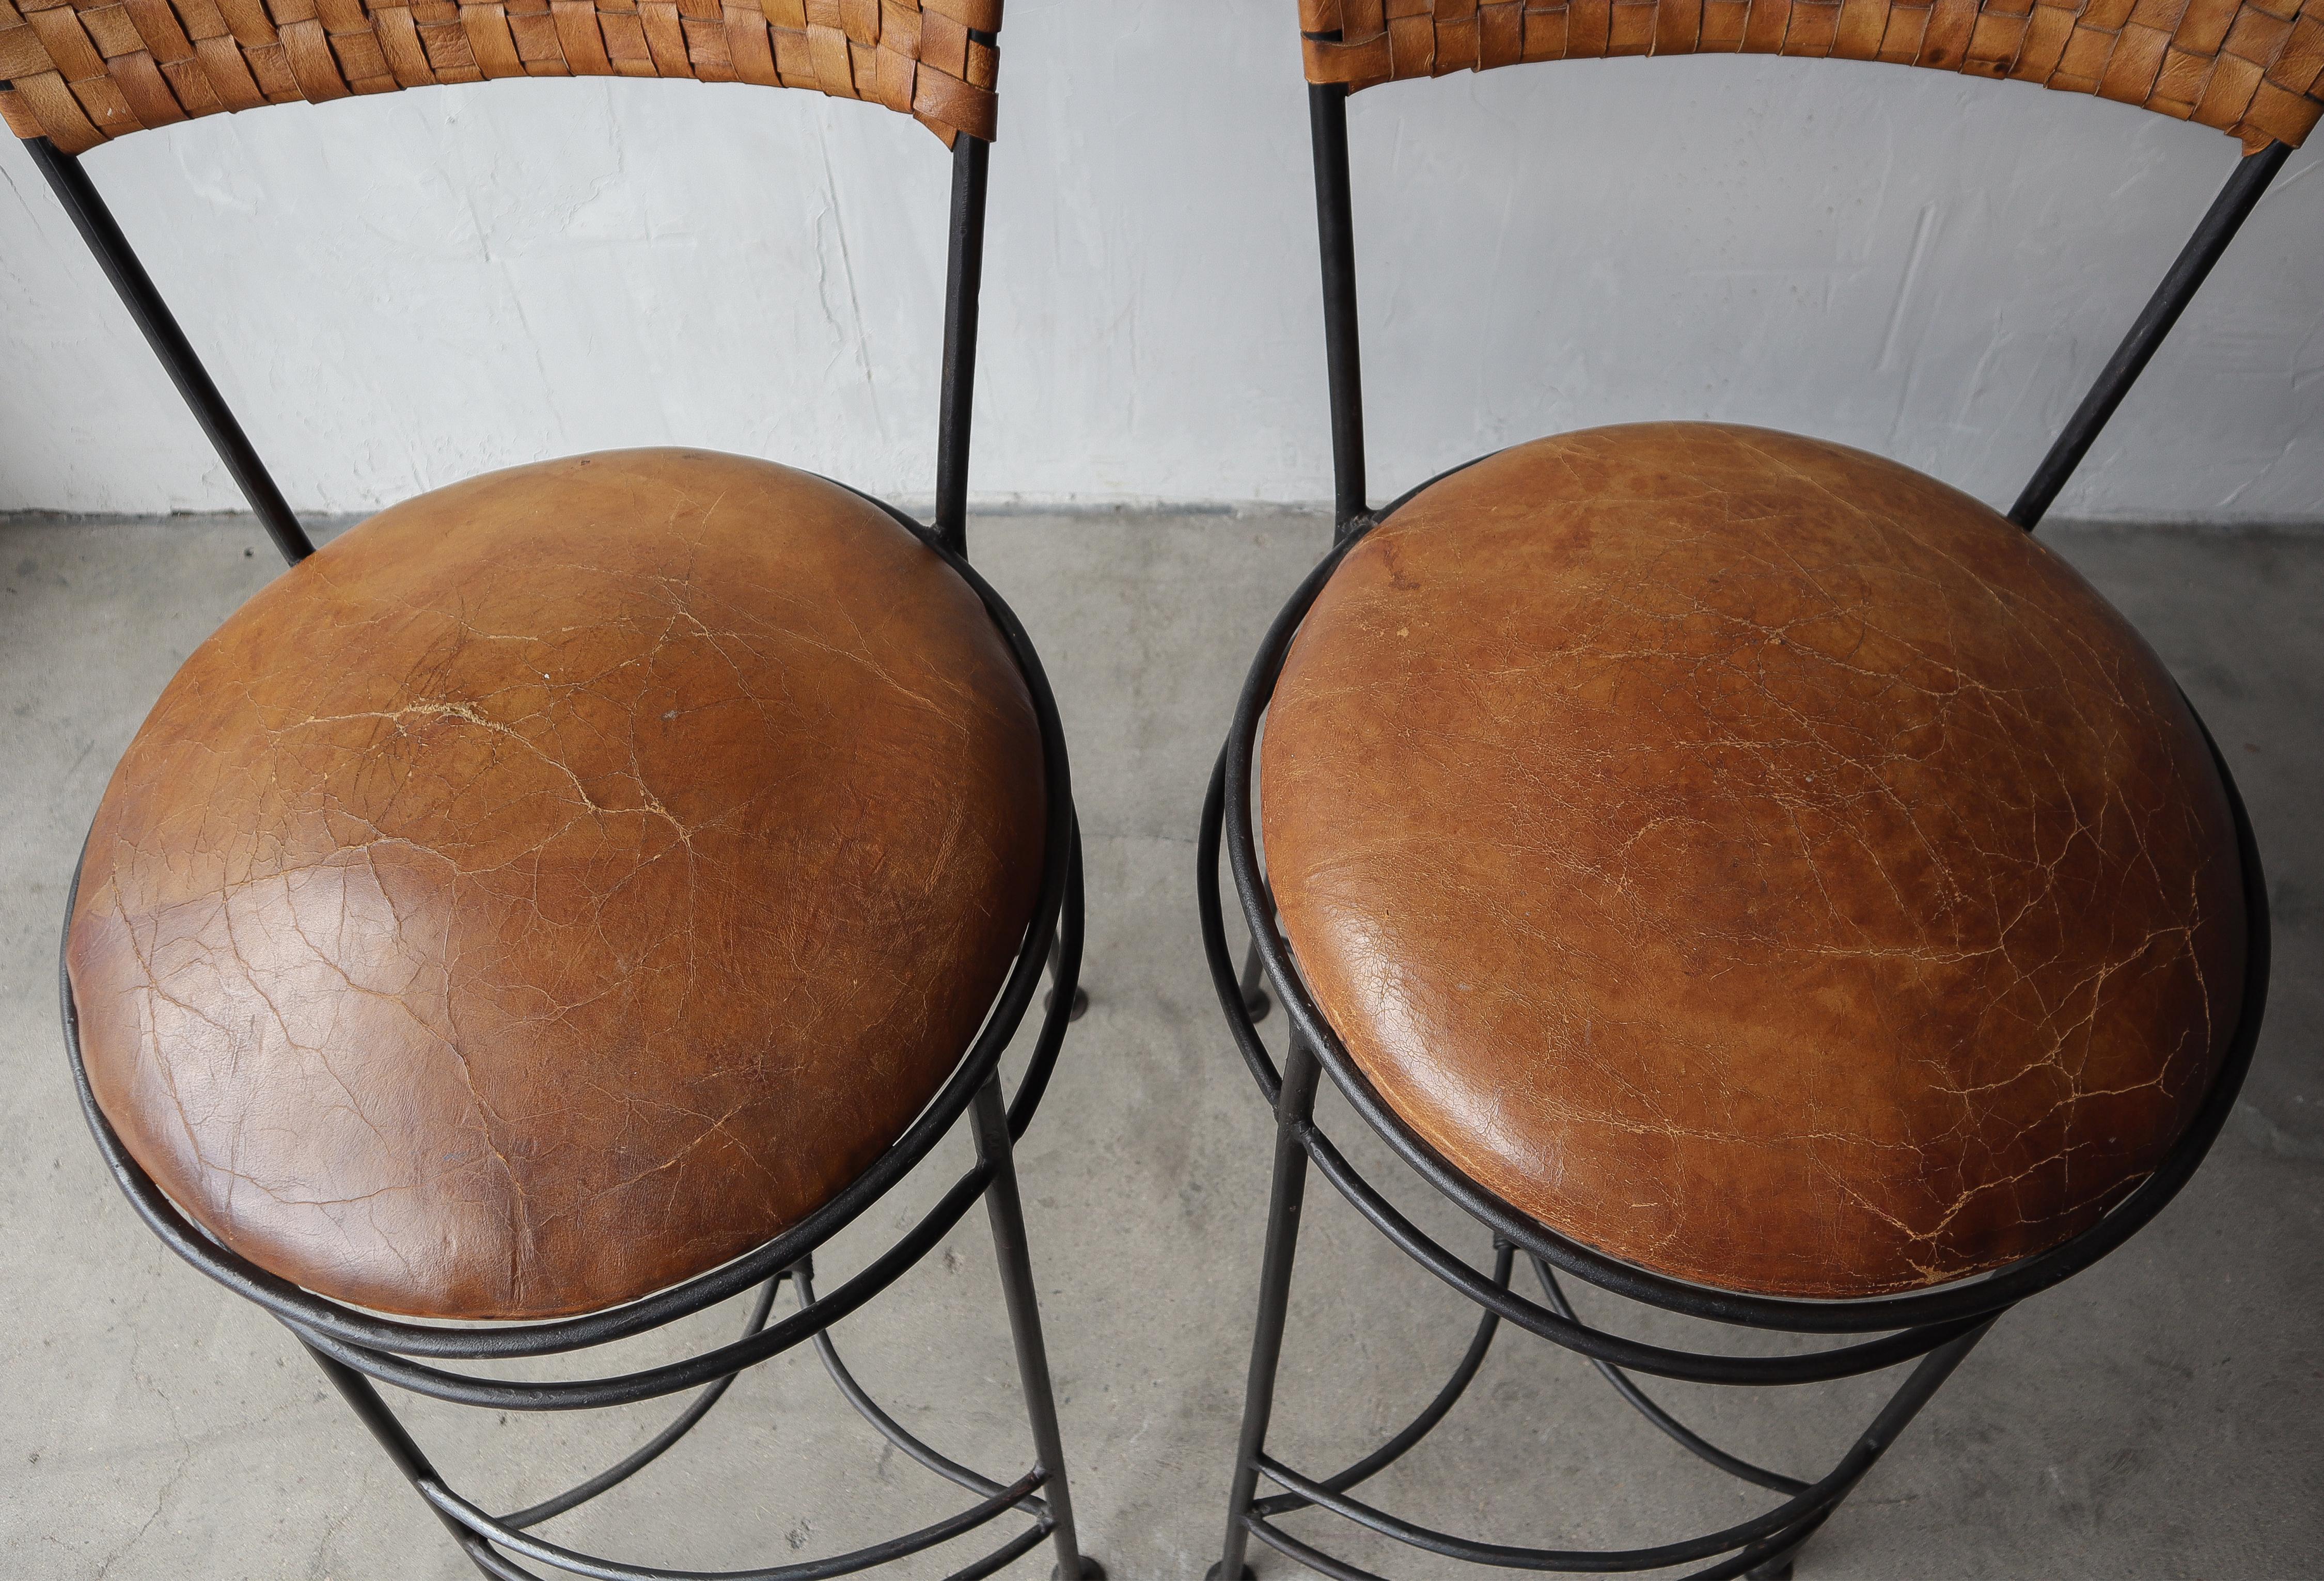 Oversized Vintage Woven Leather and Iron Bar Stools - A Pair For Sale 3